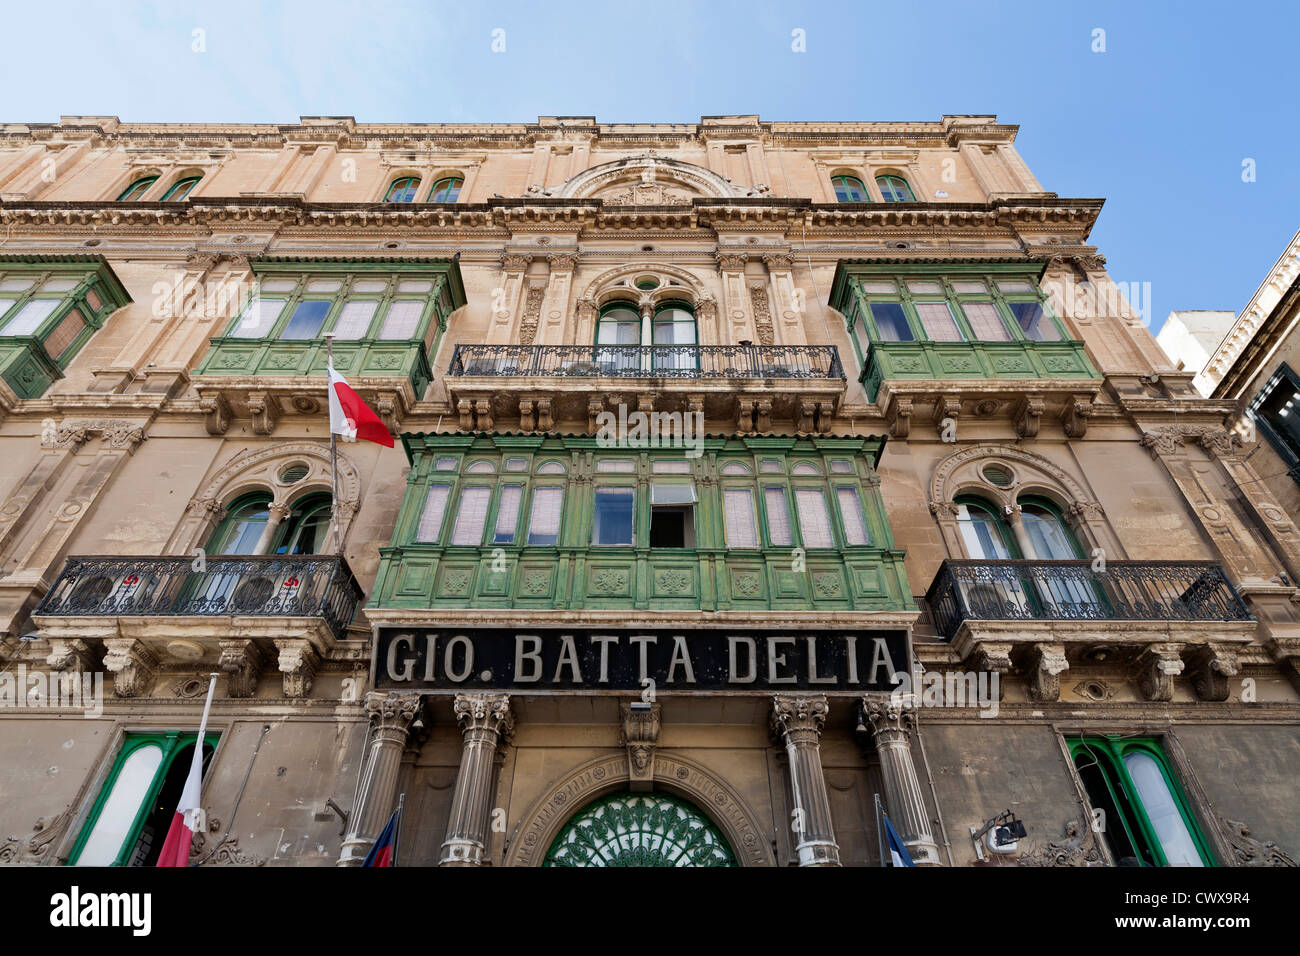 Gio Batta Delia High Resolution Stock Photography and Images - Alamy